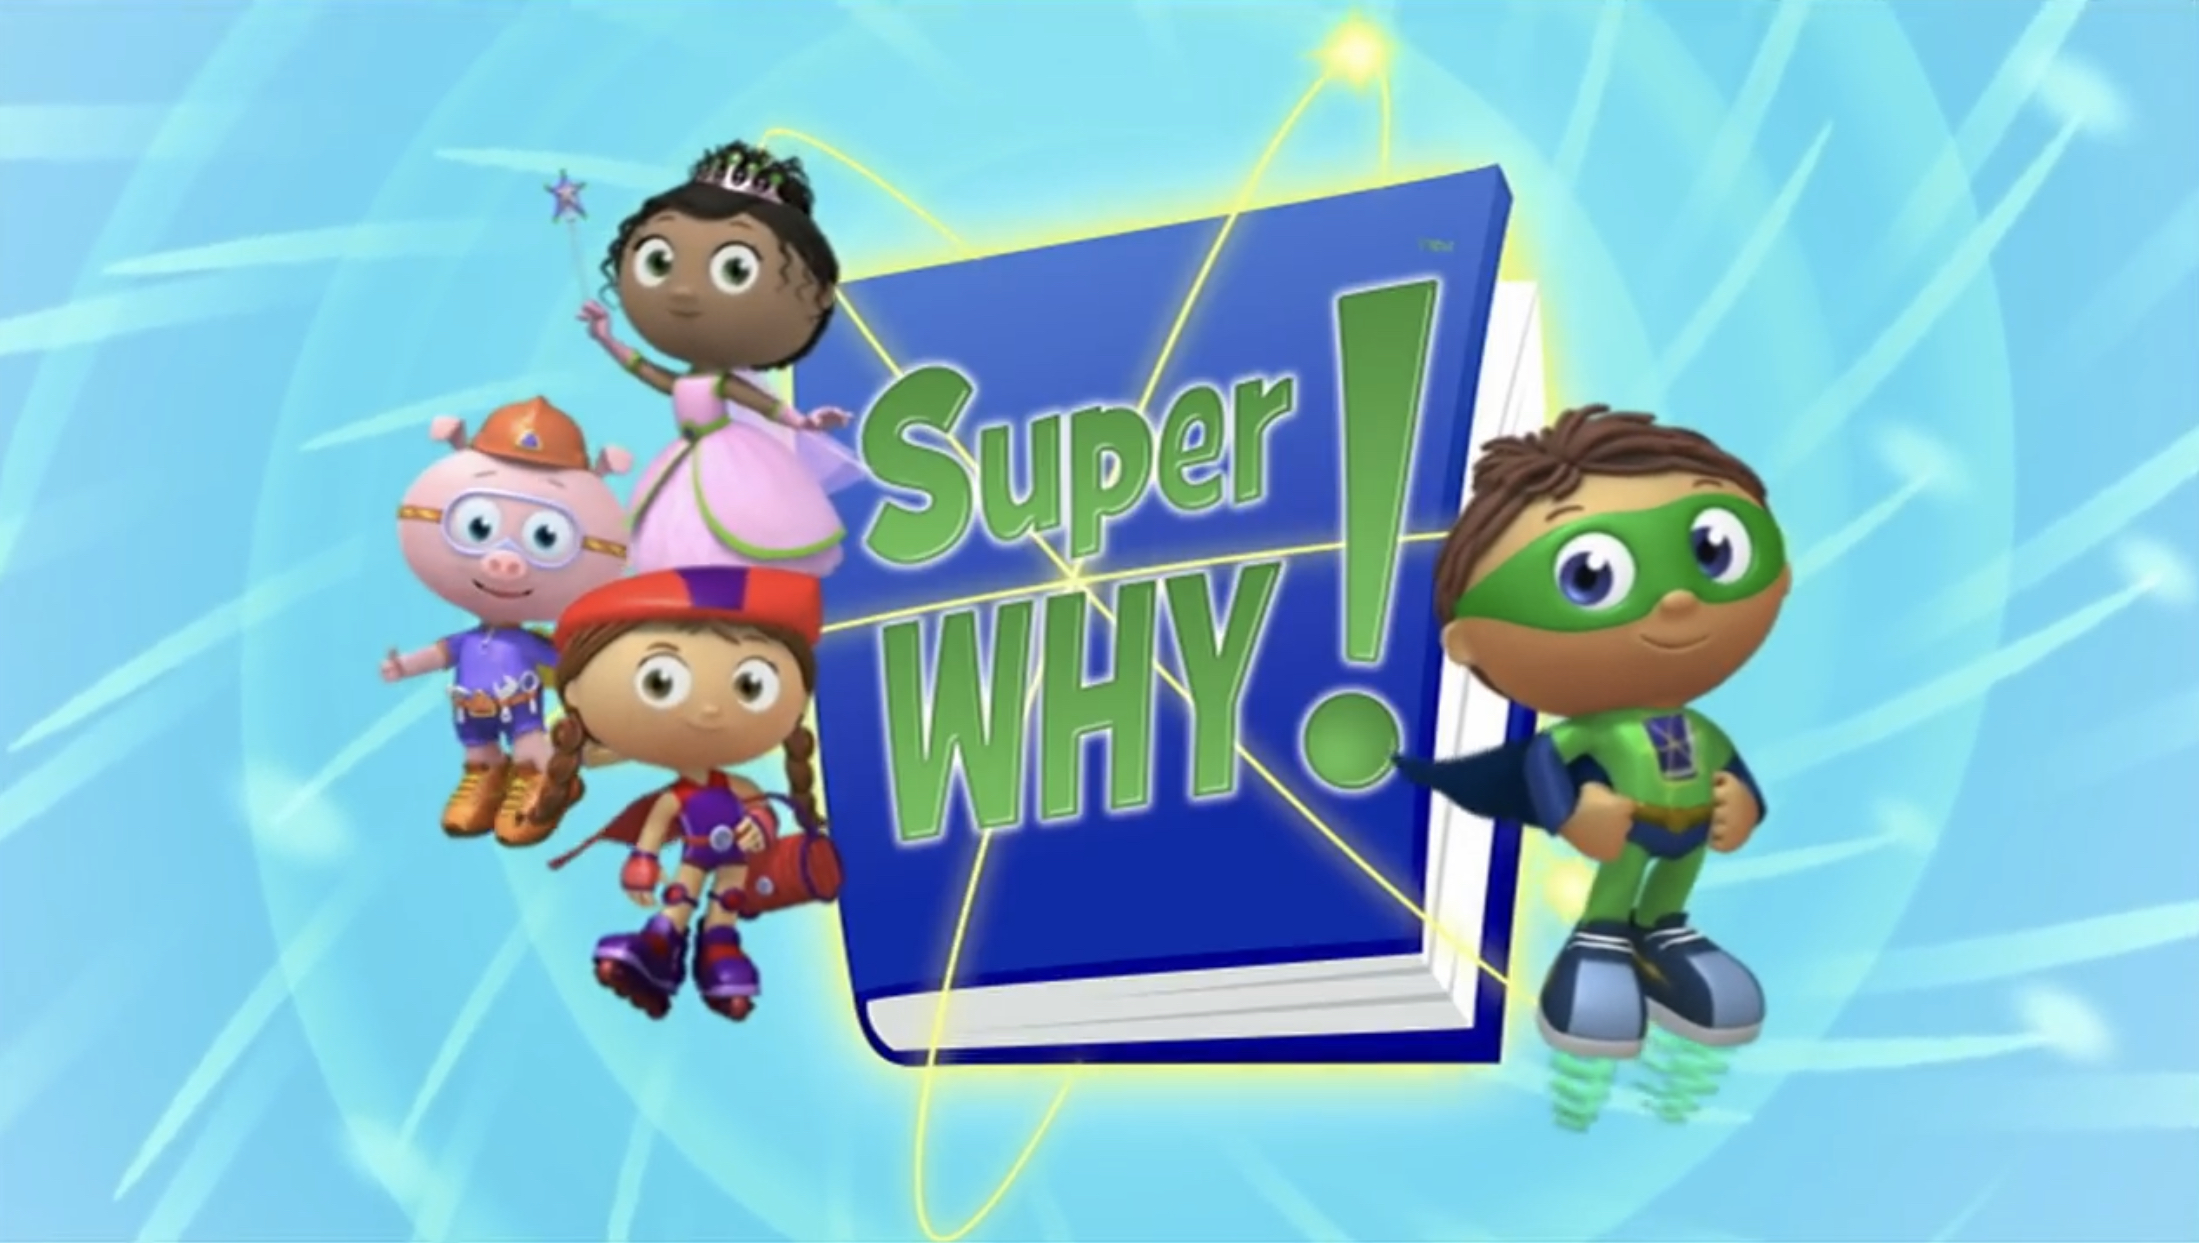 Super Why! UK Dub (The Three Little Pigs episode) - Super Why! (partially found British dub of PBS Kids CGI animated series; late 2000s-2010s)